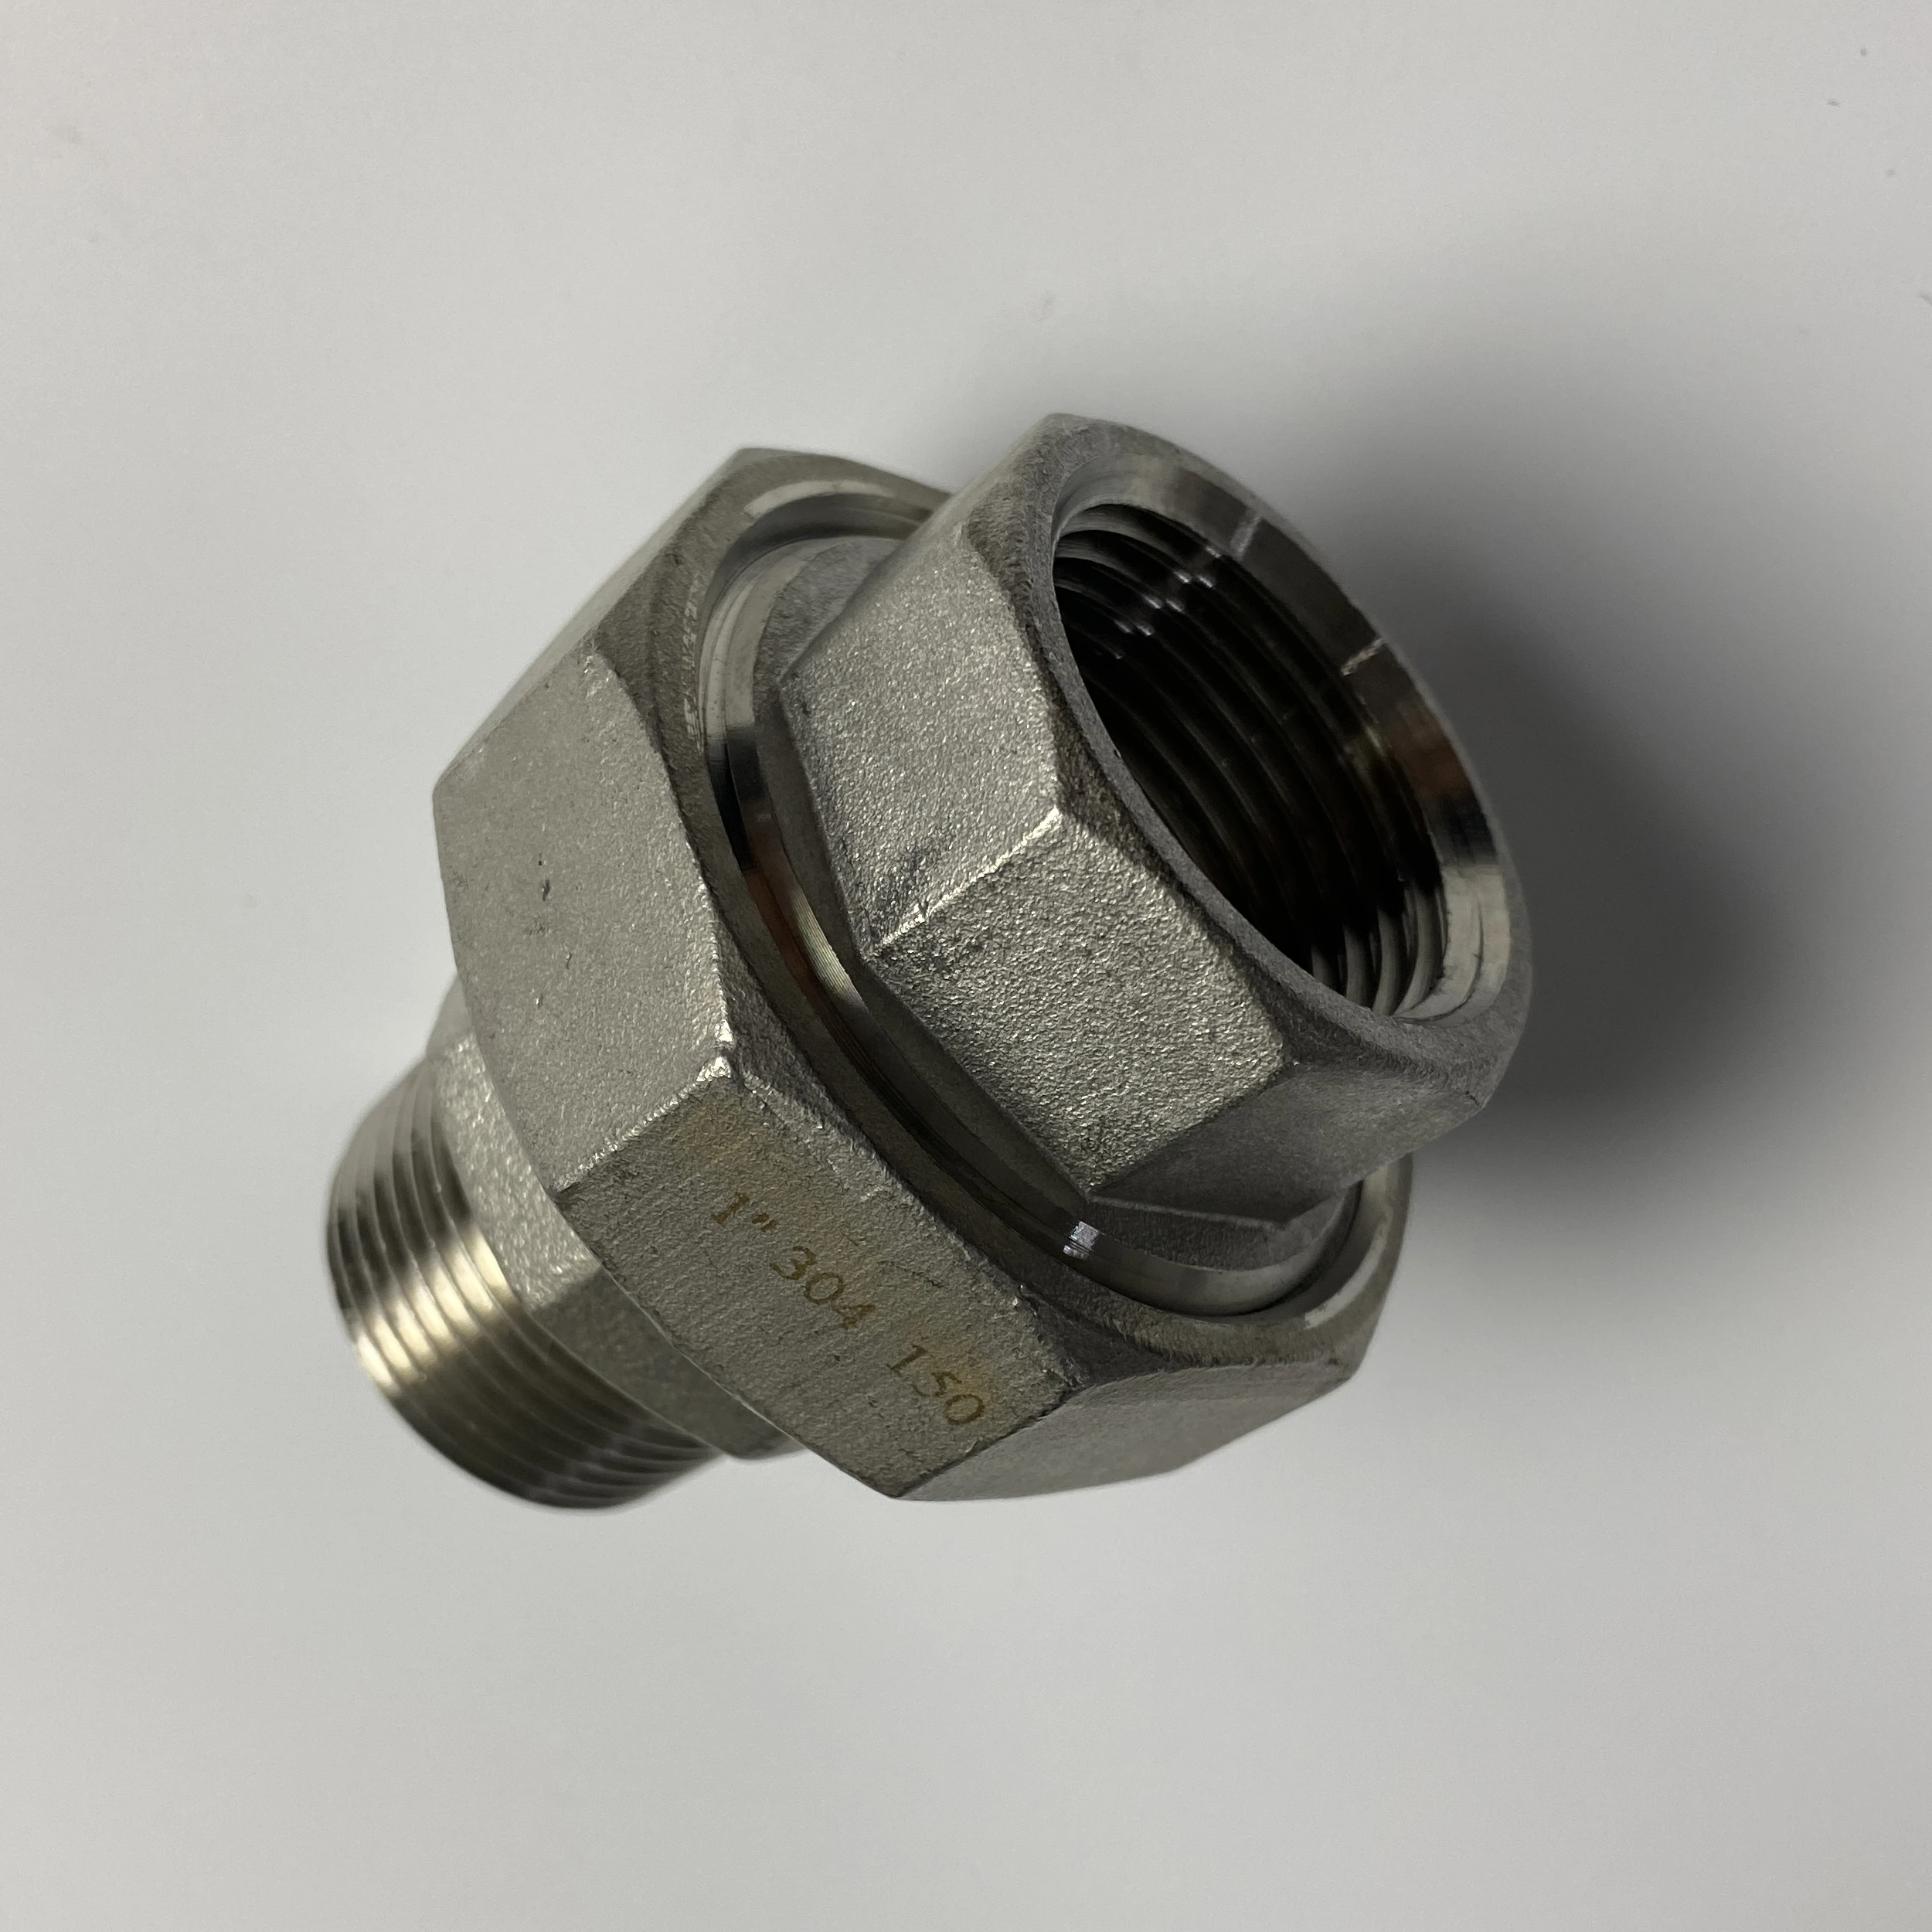 1“ BSP NPT Female*Male Thread SS304 Stainless Steel Live Joint Coupling Union Conical Seat Adapter Connector Pipe Fitting